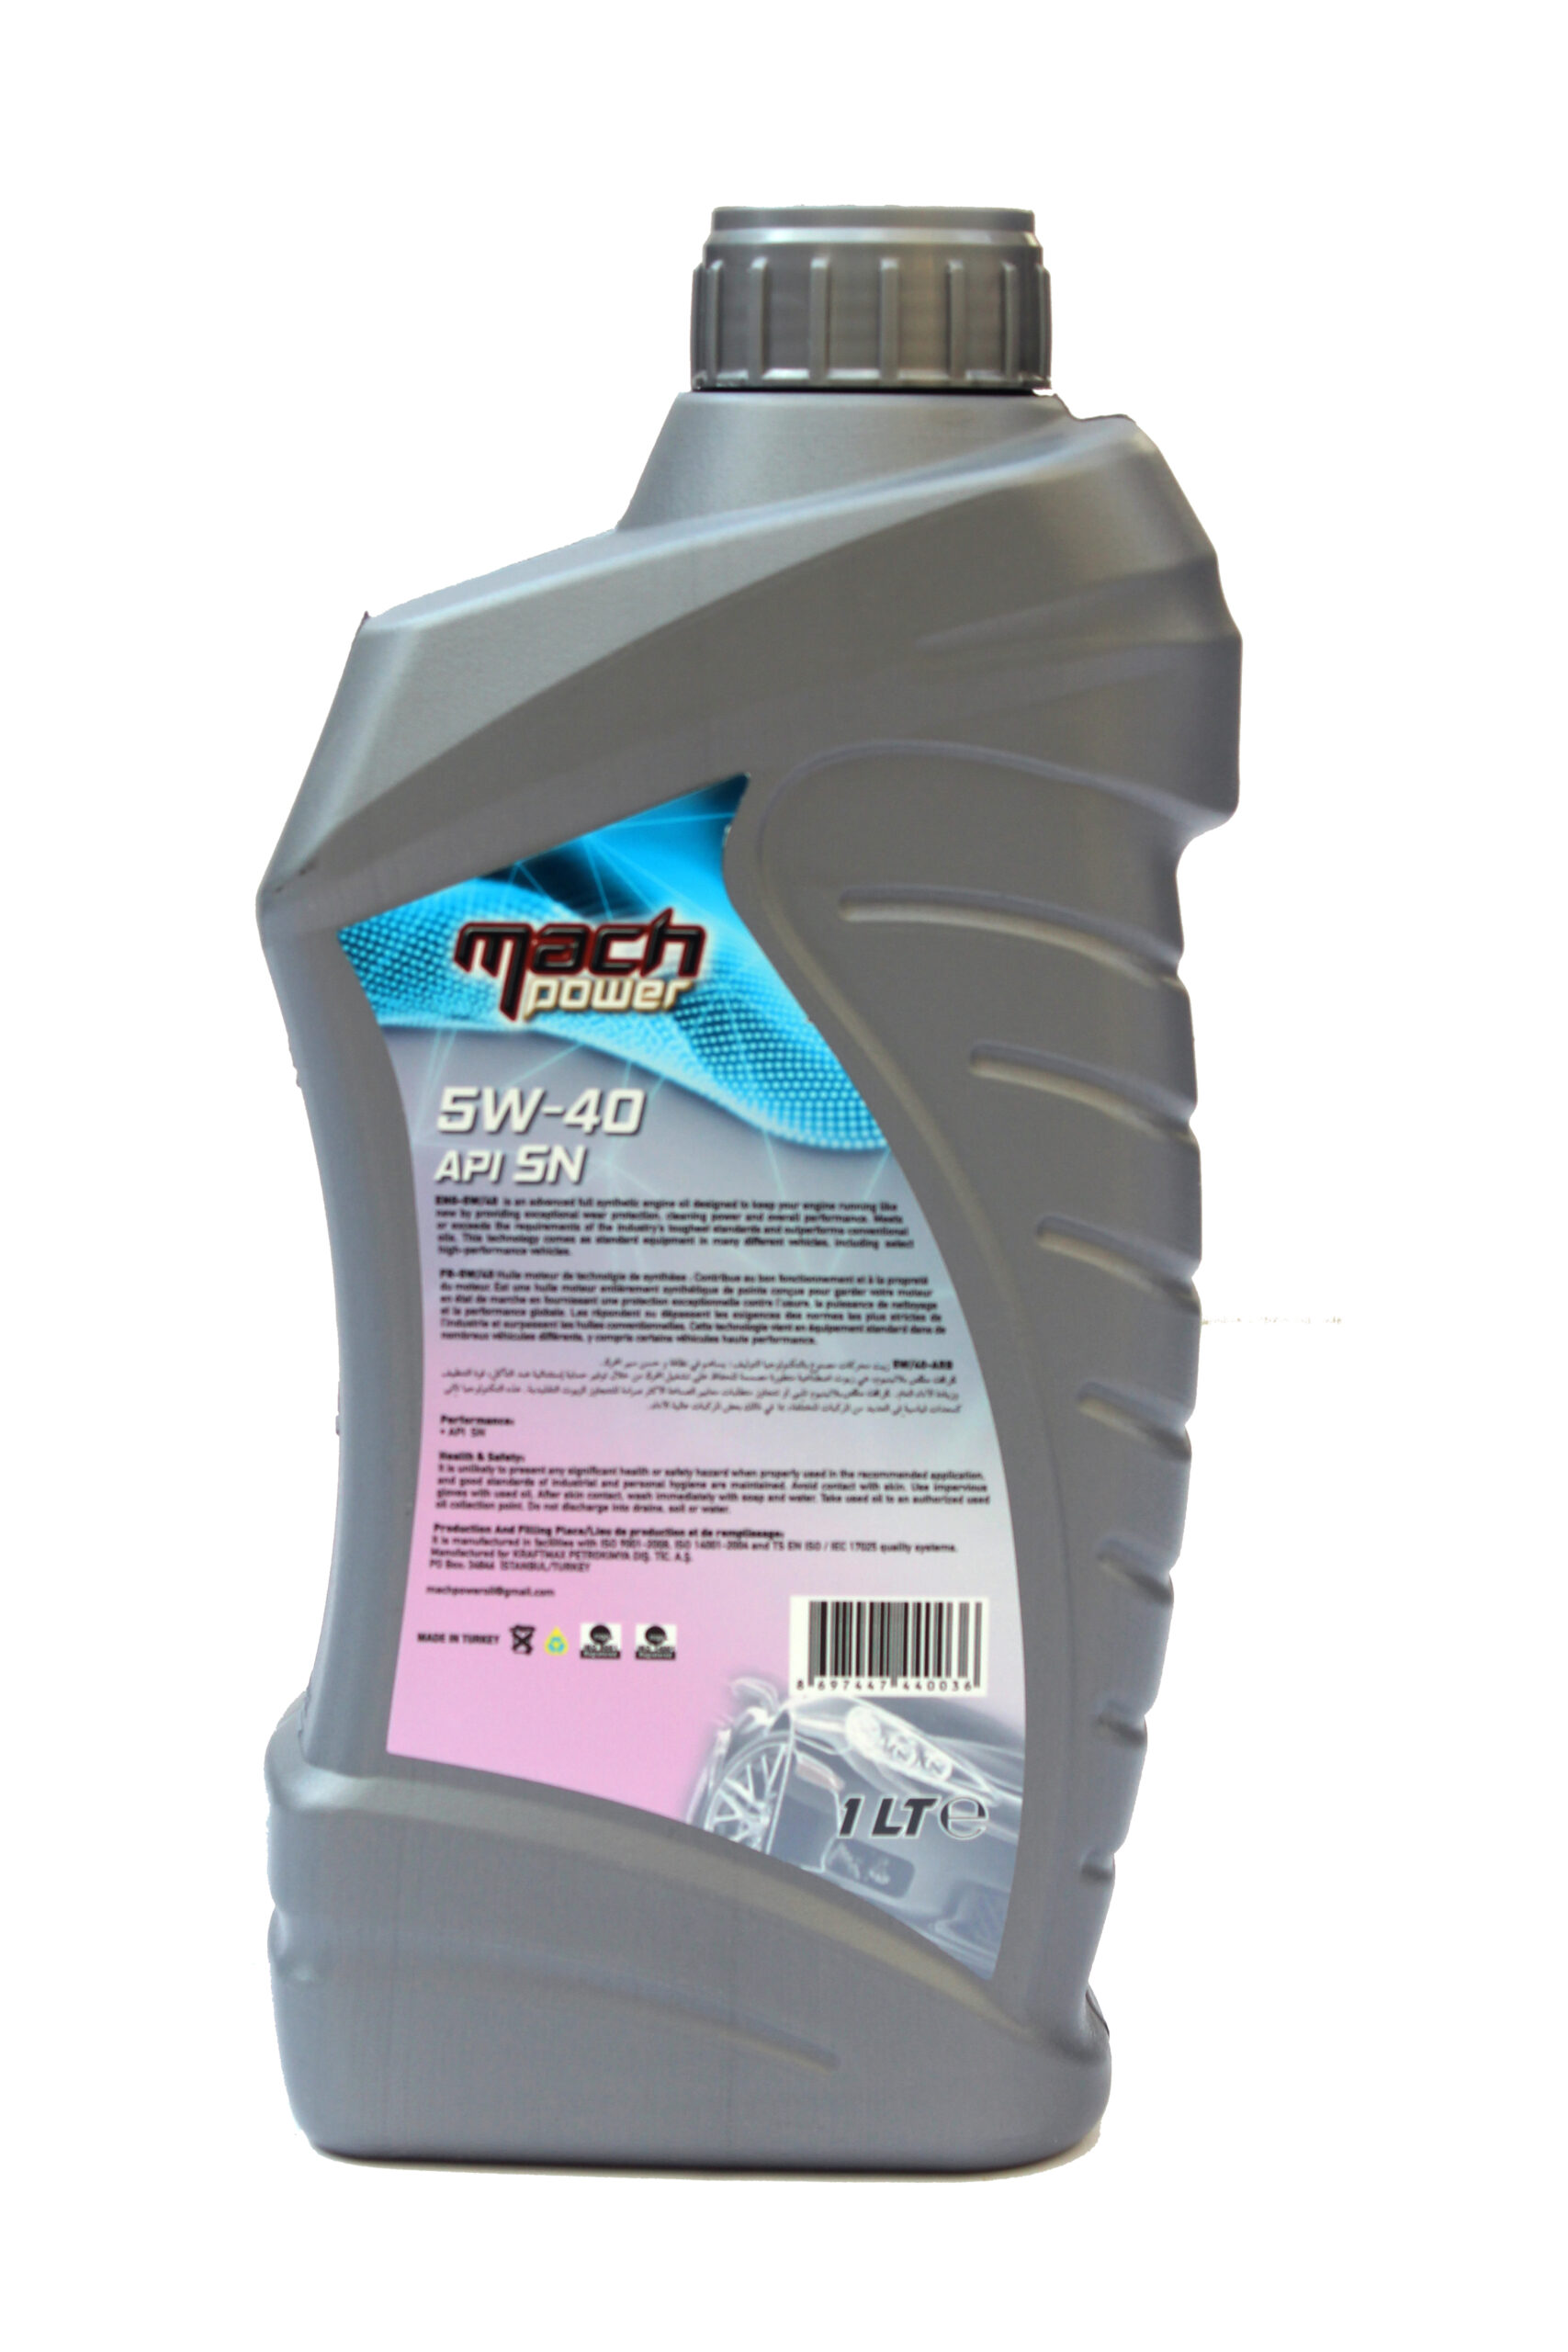 5W40 MACH POWER FULLY SYNTHETIC ENGINE OIL 1L